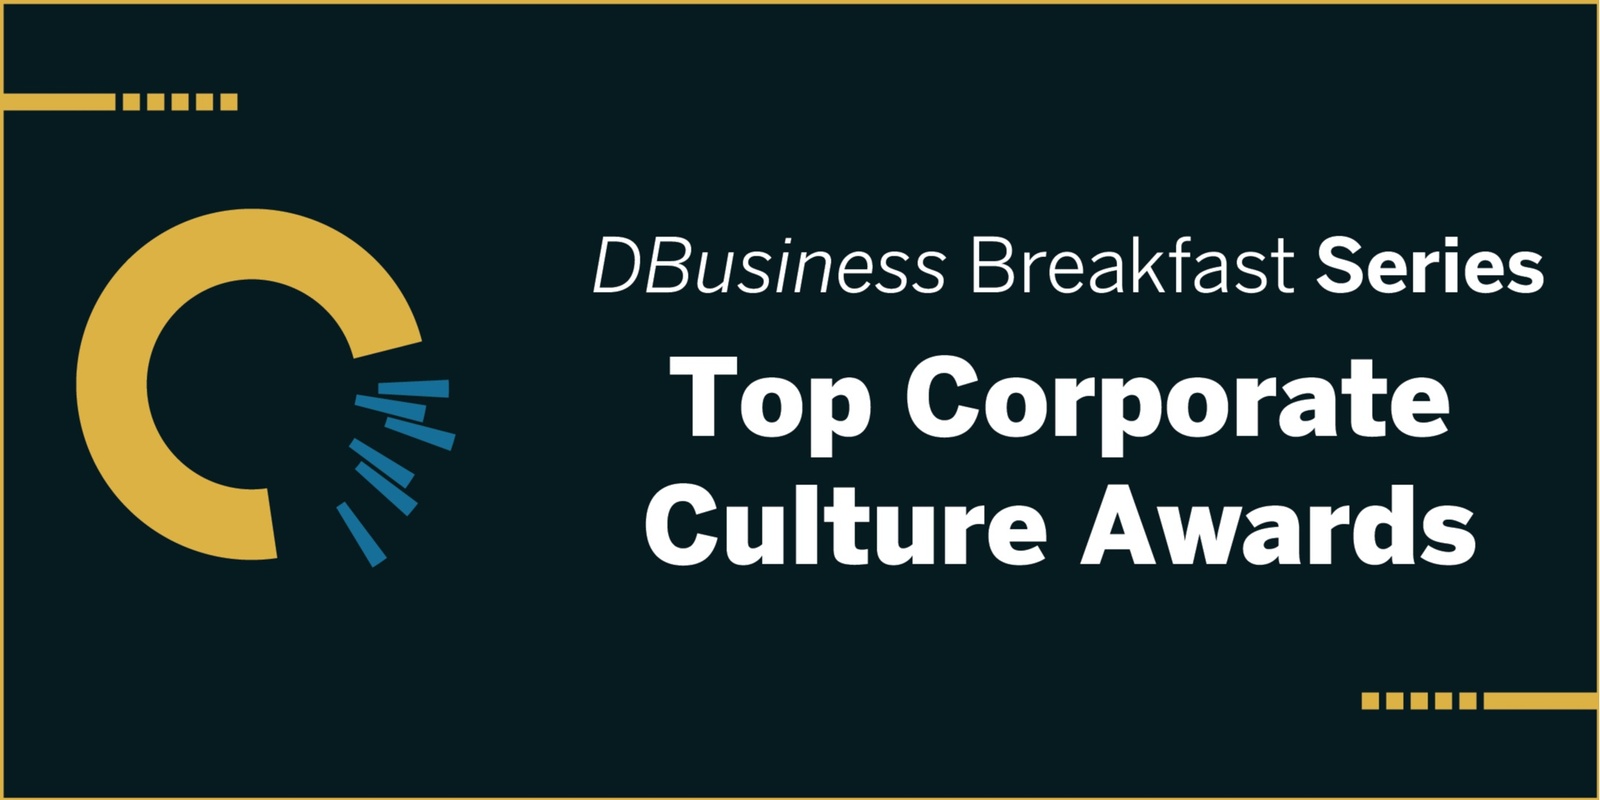 Banner image for Top Corporate Culture Awards: DBusiness Breakfast Series